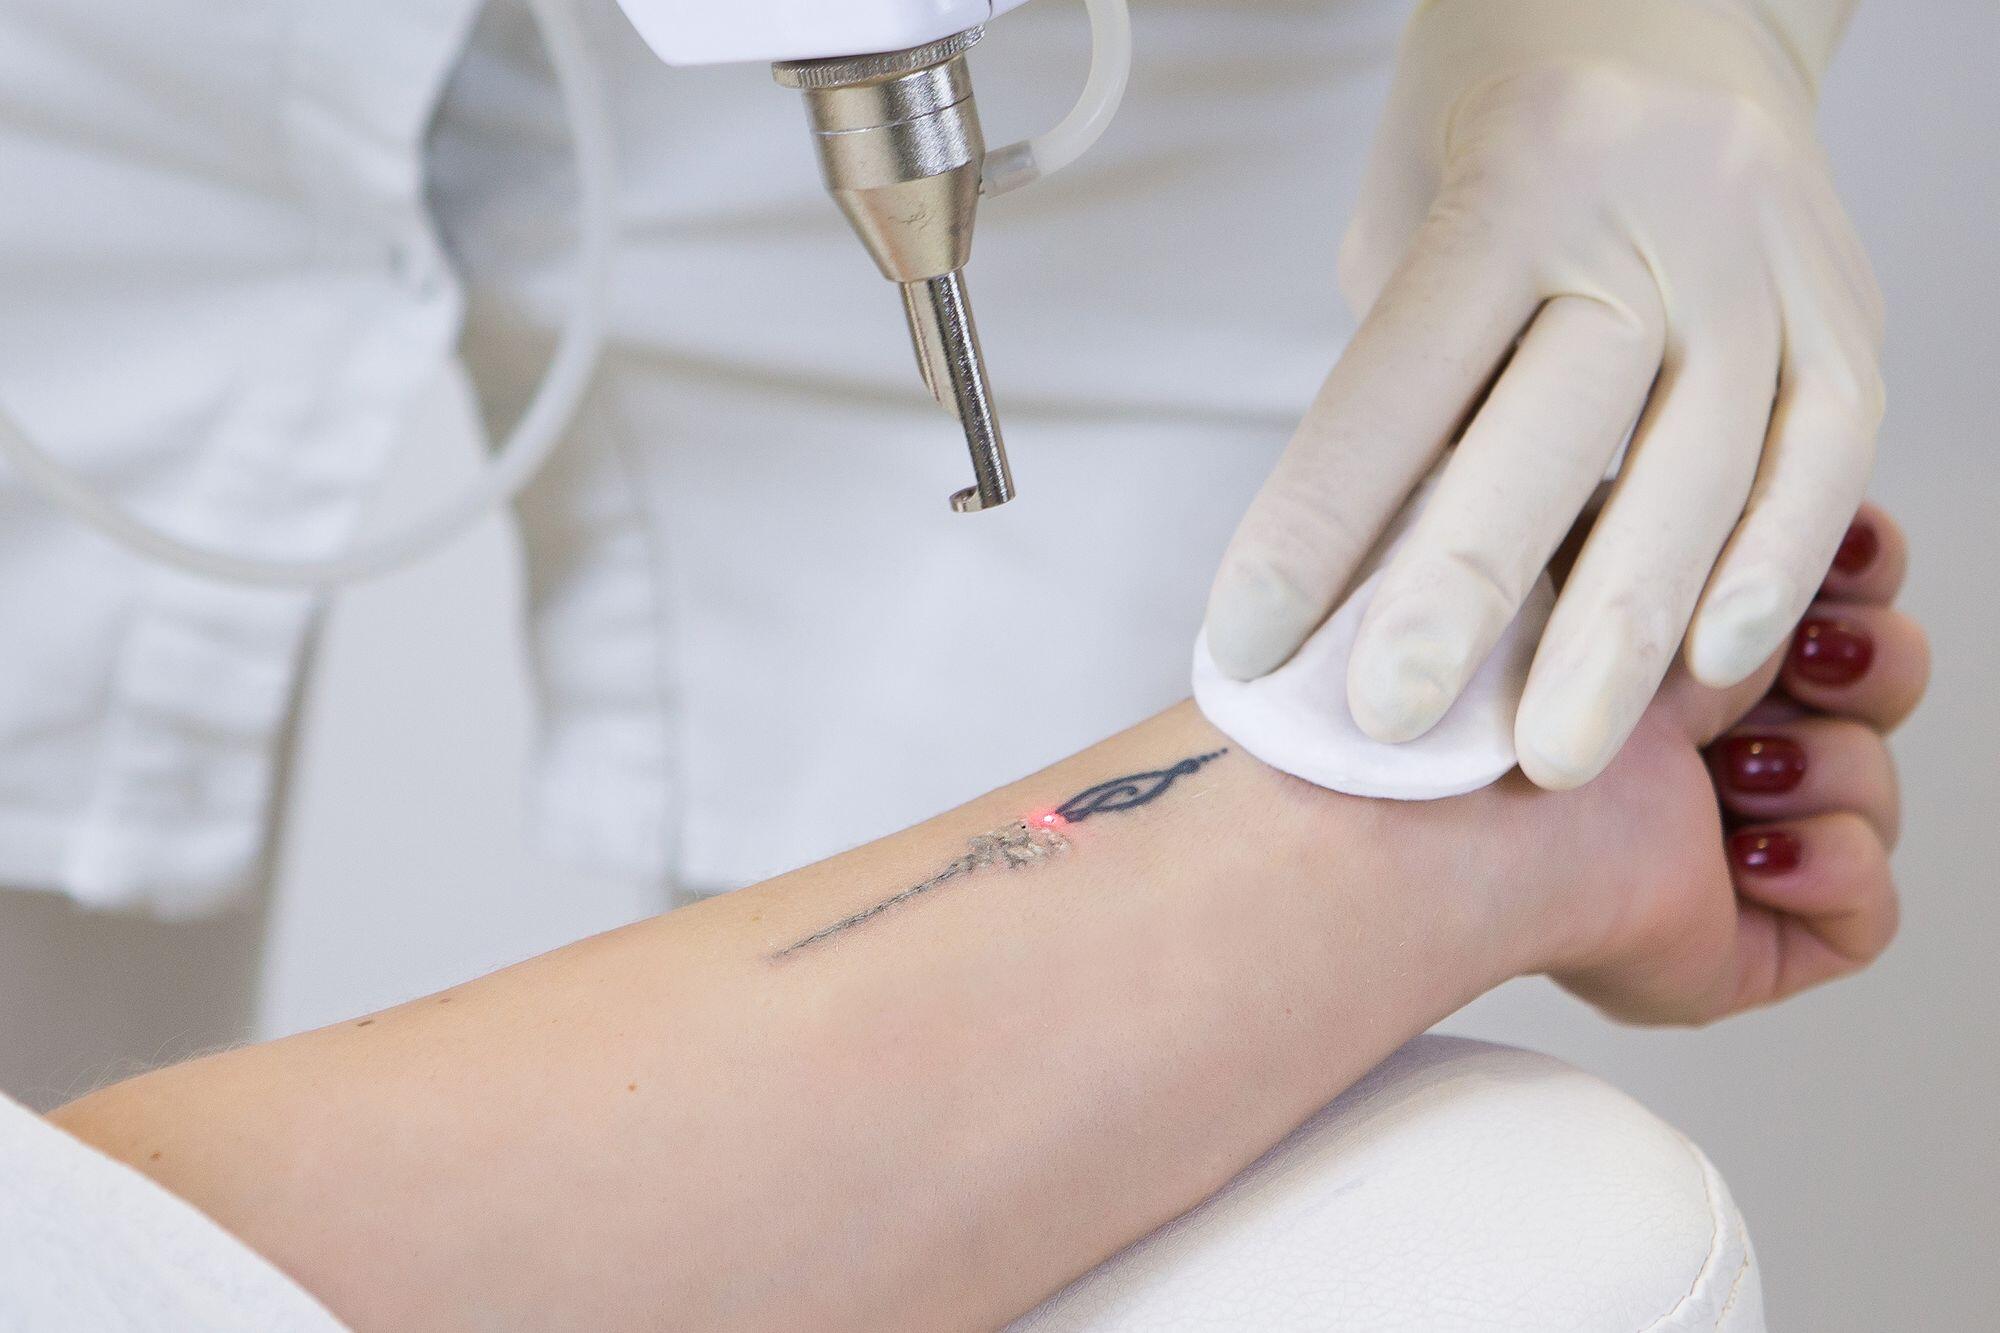 What are the benefits of laser tattoo removal?